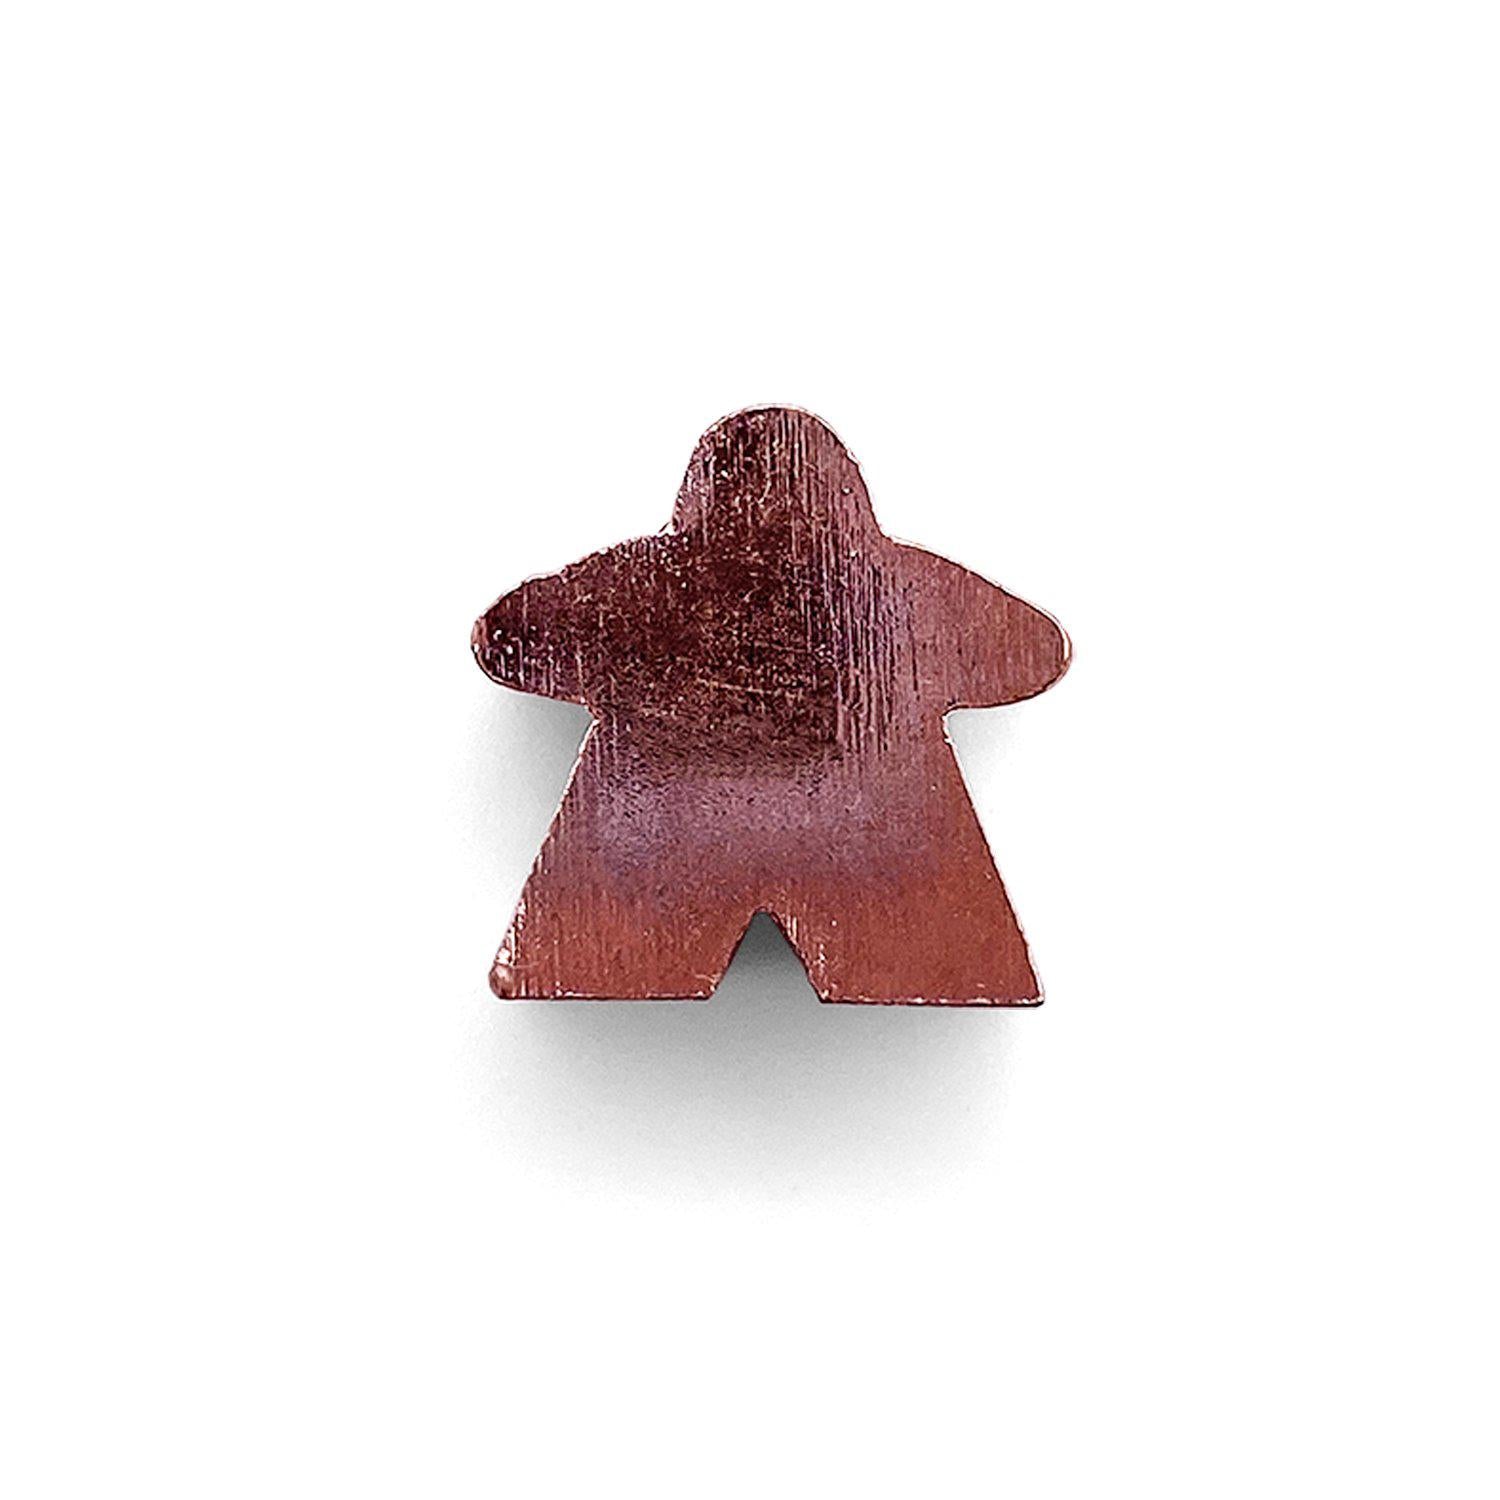 8 Pack of Shiny Copper Metal Meeples by Norse Foundry